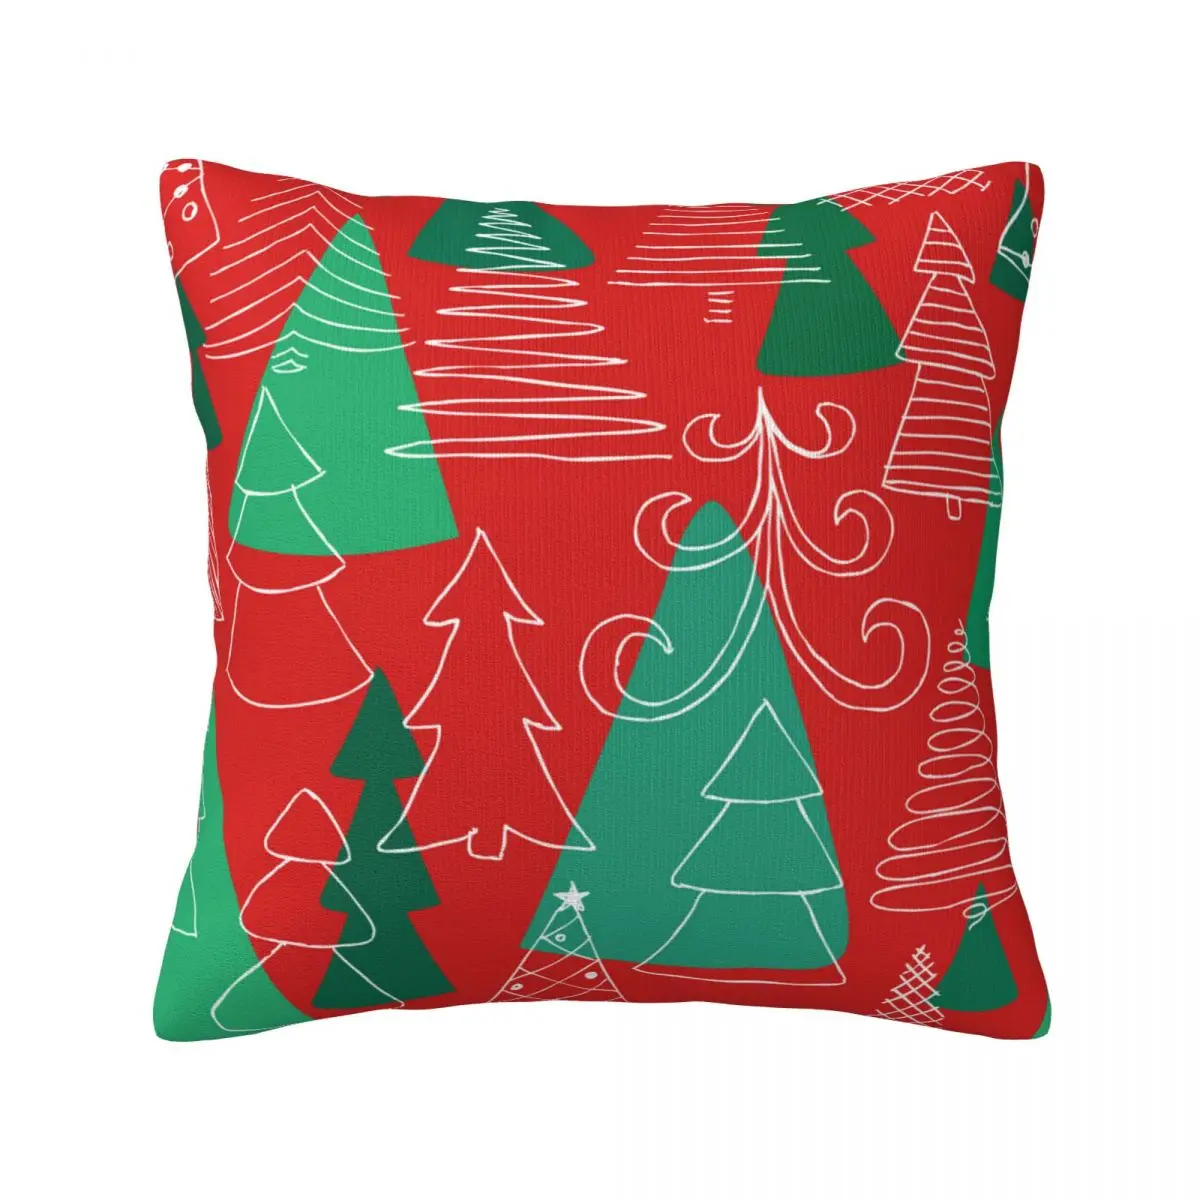 

Sketch Christmas Throw Pillow Cover Decorative Pillow Covers Home Pillows Shells Cushion Cover Zippered Pillowcase